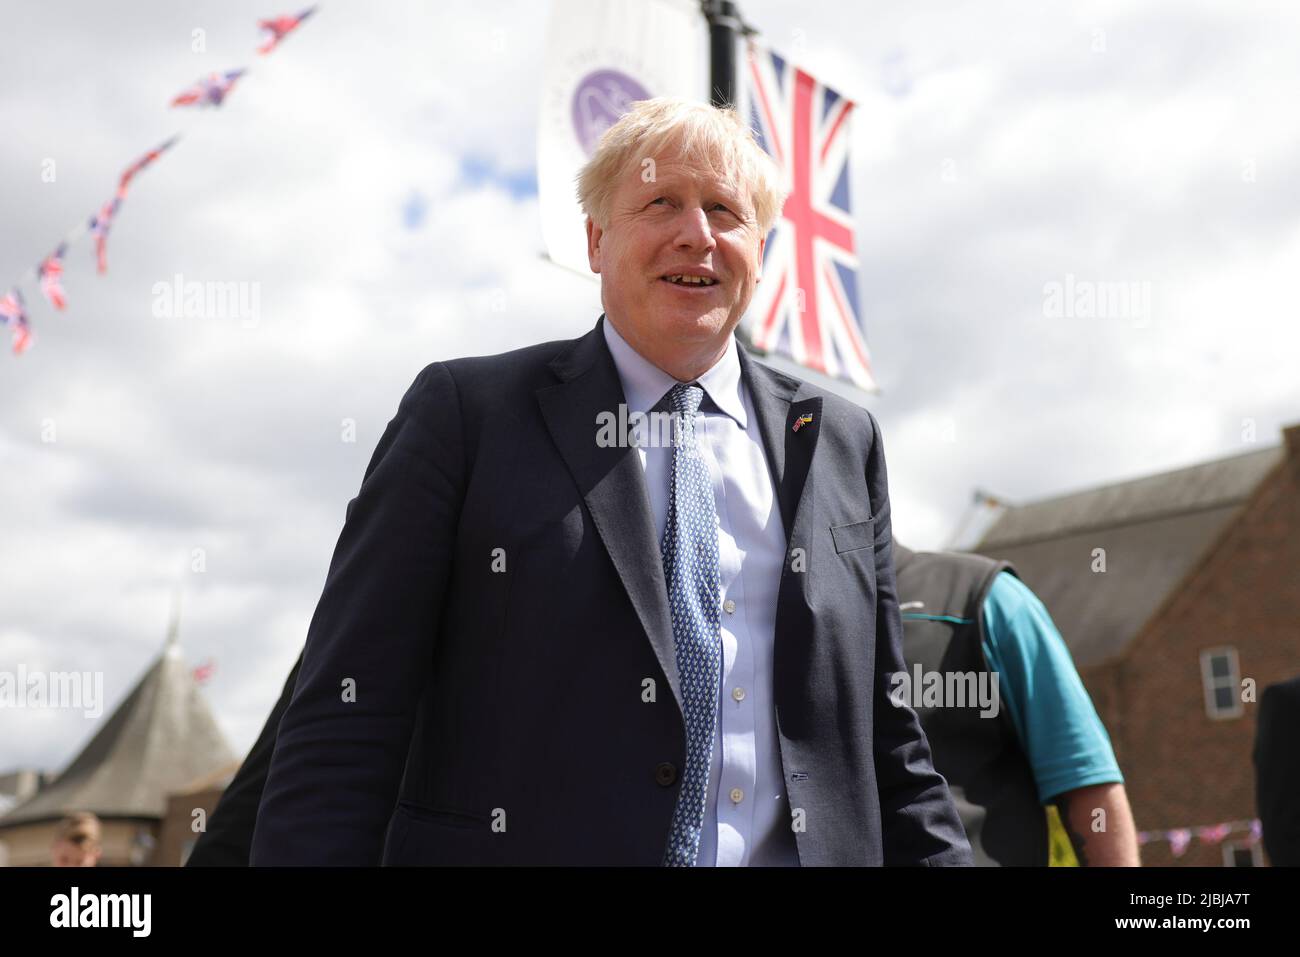 (220607) -- LONDON, June 7, 2022 (Xinhua) -- British Prime Minister Boris Johnson visits Darlington town centre in Britain, May 27, 2022. Boris Johnson on Monday won a no-confidence vote among Conservative lawmakers, saving his precarious premiership. Johnson won the support of 211 out of 359 lawmakers, dozens more than the threshold of 180 votes, according to the result announced by Graham Brady, chairman of the Conservative Party's parliamentary group, the 1922 Committee. (Andrew Parsons/No. 10 Downing Street/Handout via Xinhua) Stock Photo